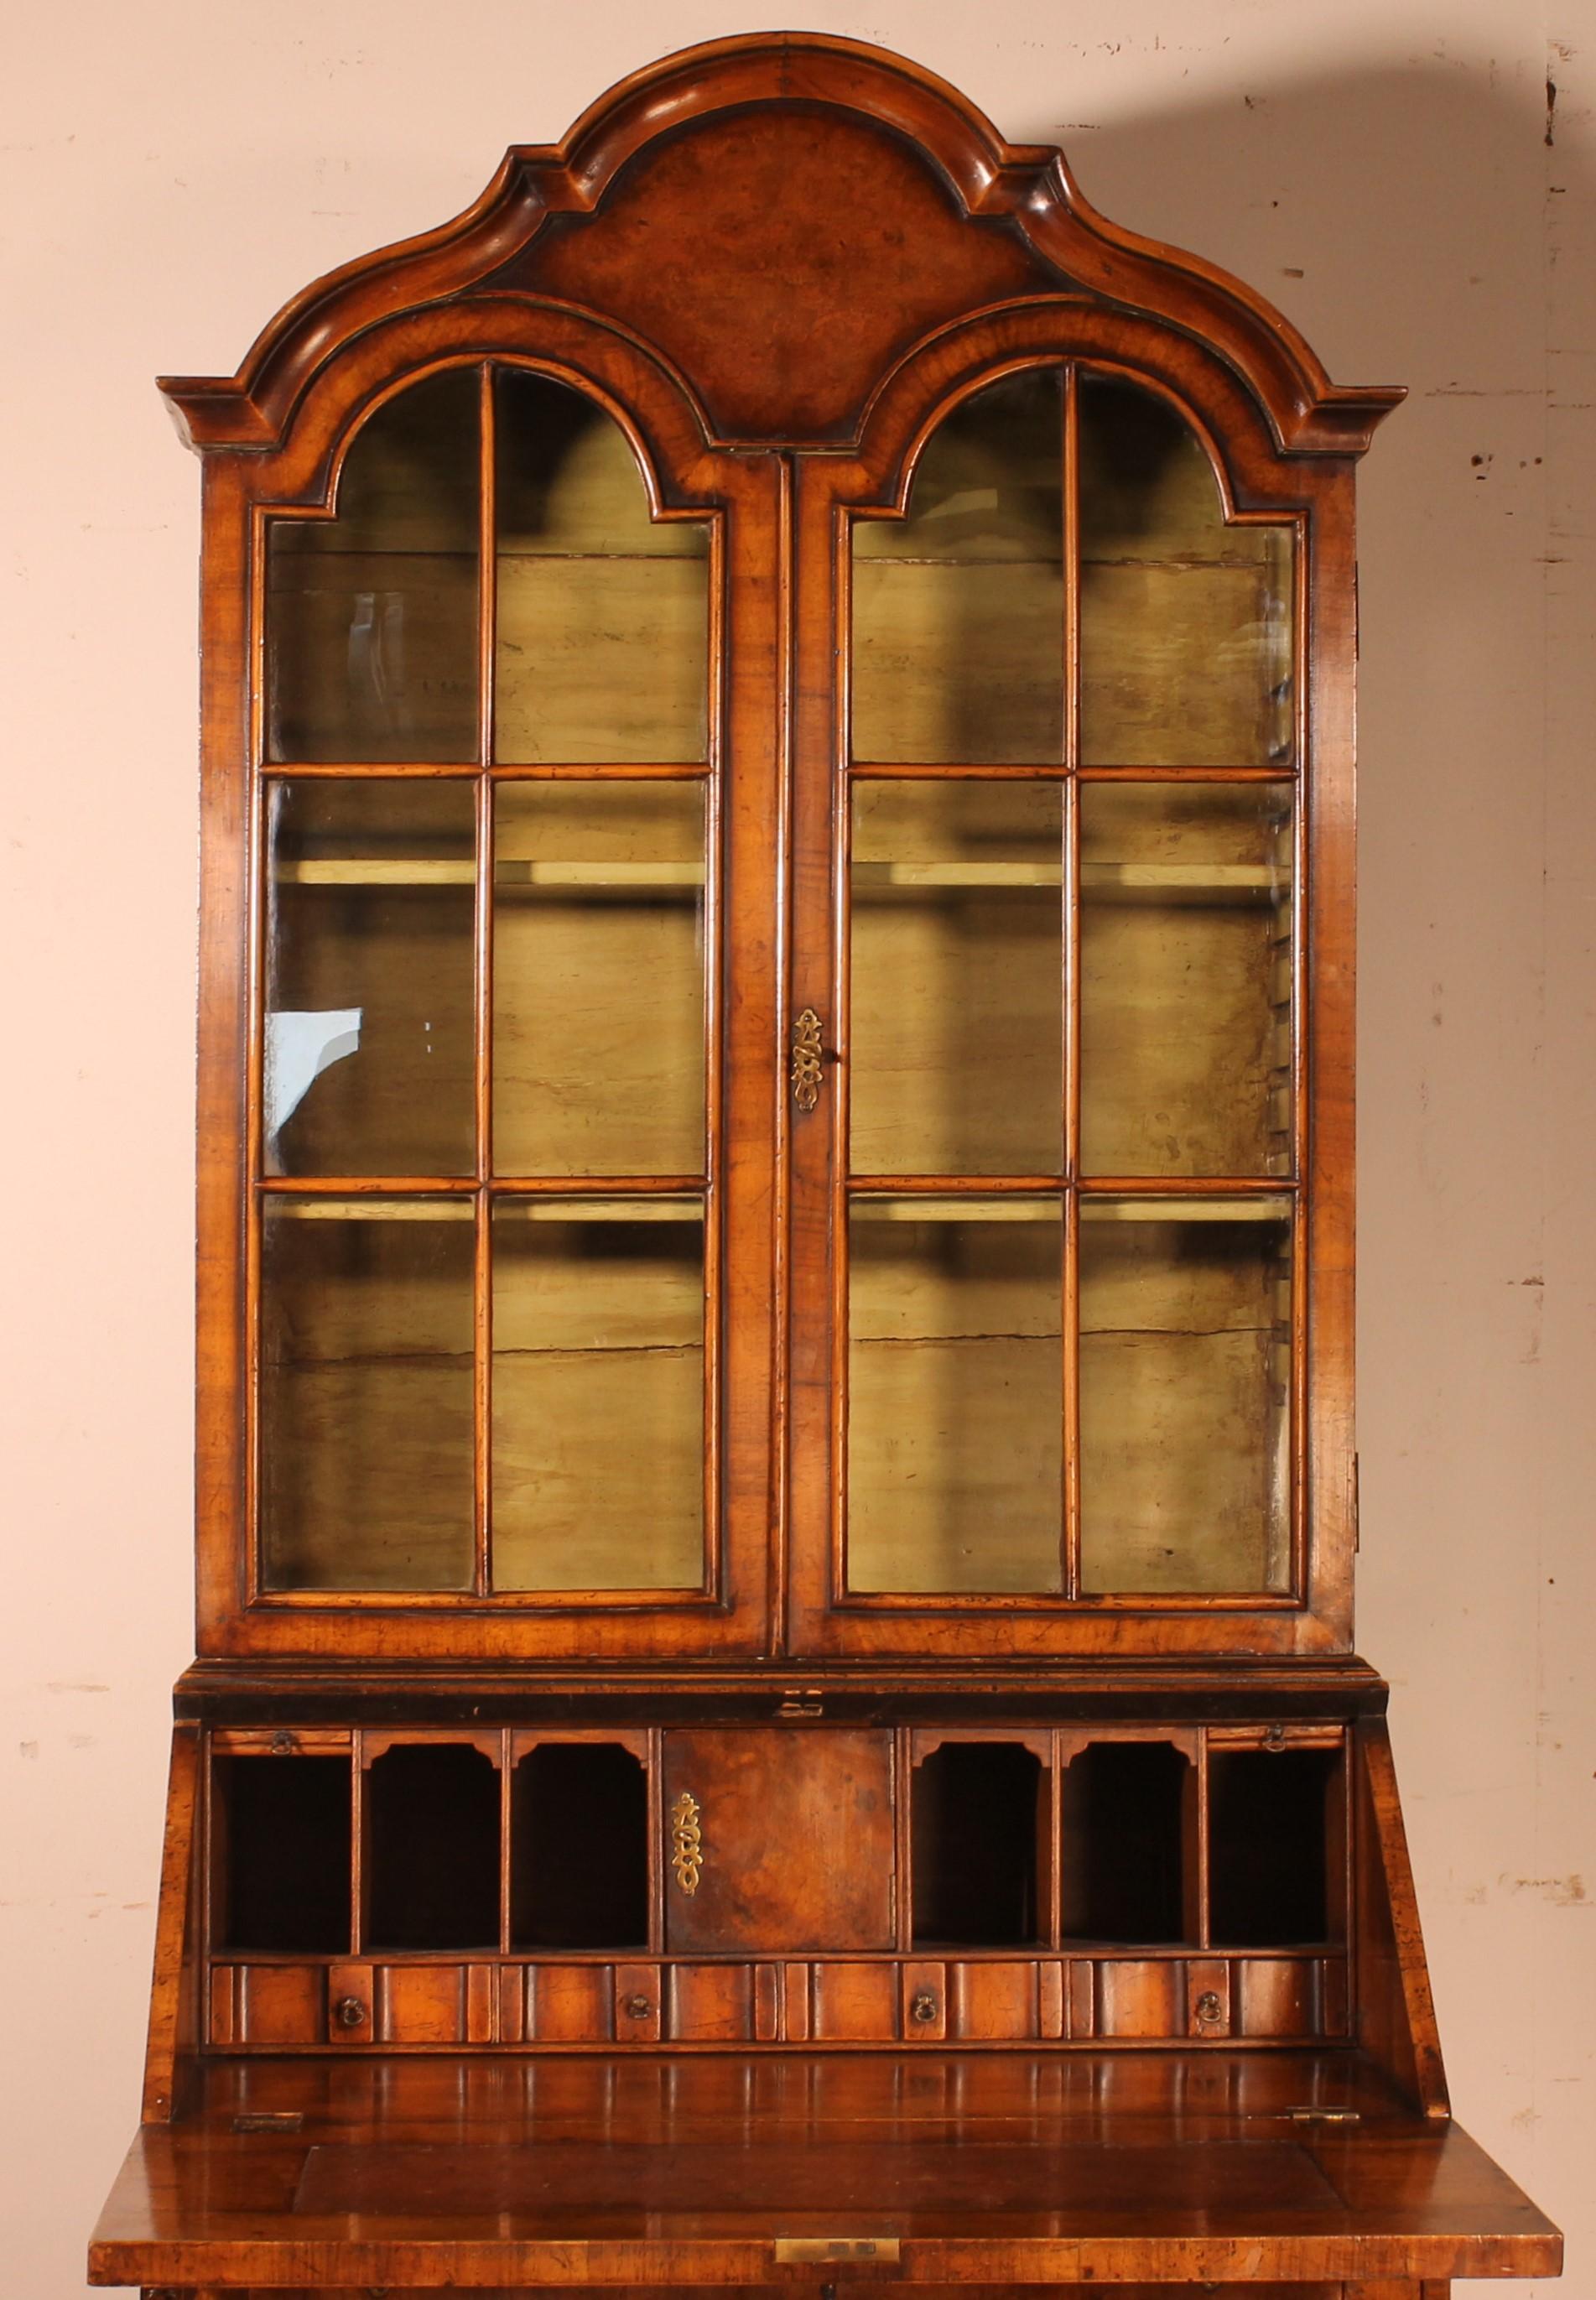 Glazed secretaire bookcase in walnut from the second part of the 19th century of very good quality from England

Very beautiful secretary of small size which is unusual composed of 4 drawers as well as a theater in the lower part and an upper